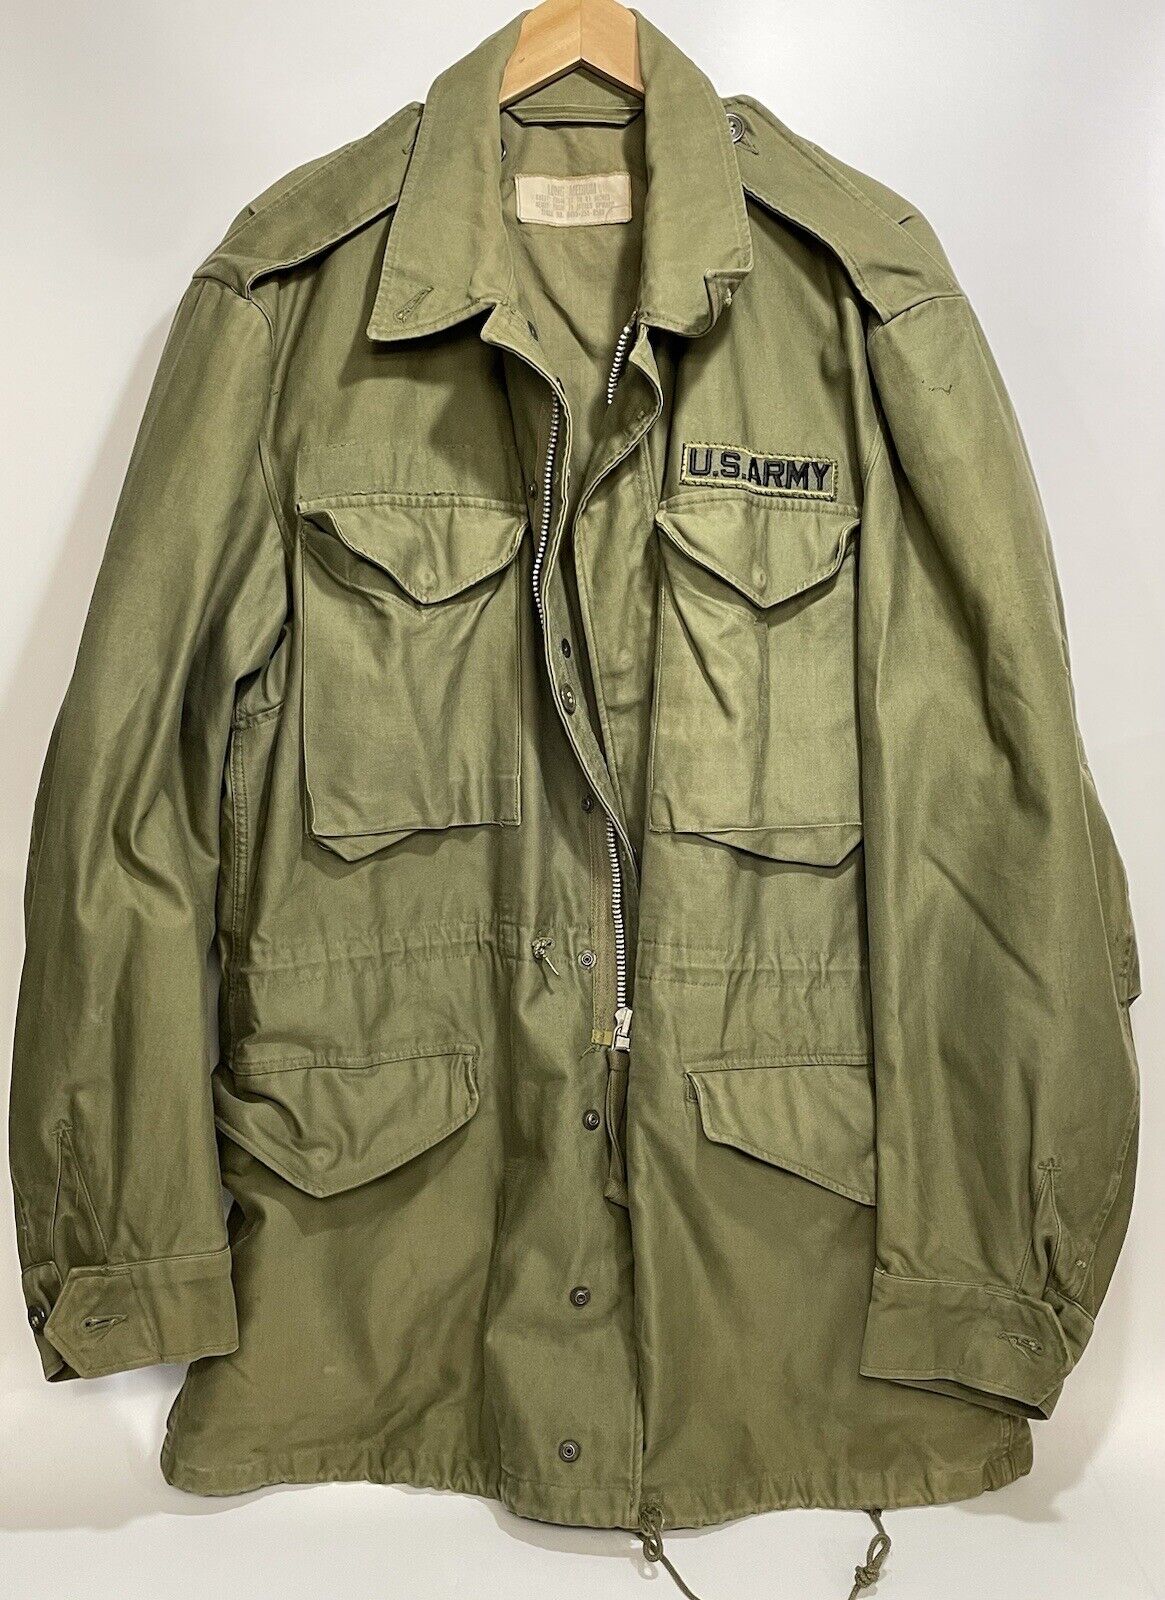 Army Field Jacket Coat Cold Weather Military OG-107 Vintage Olive Shade Green